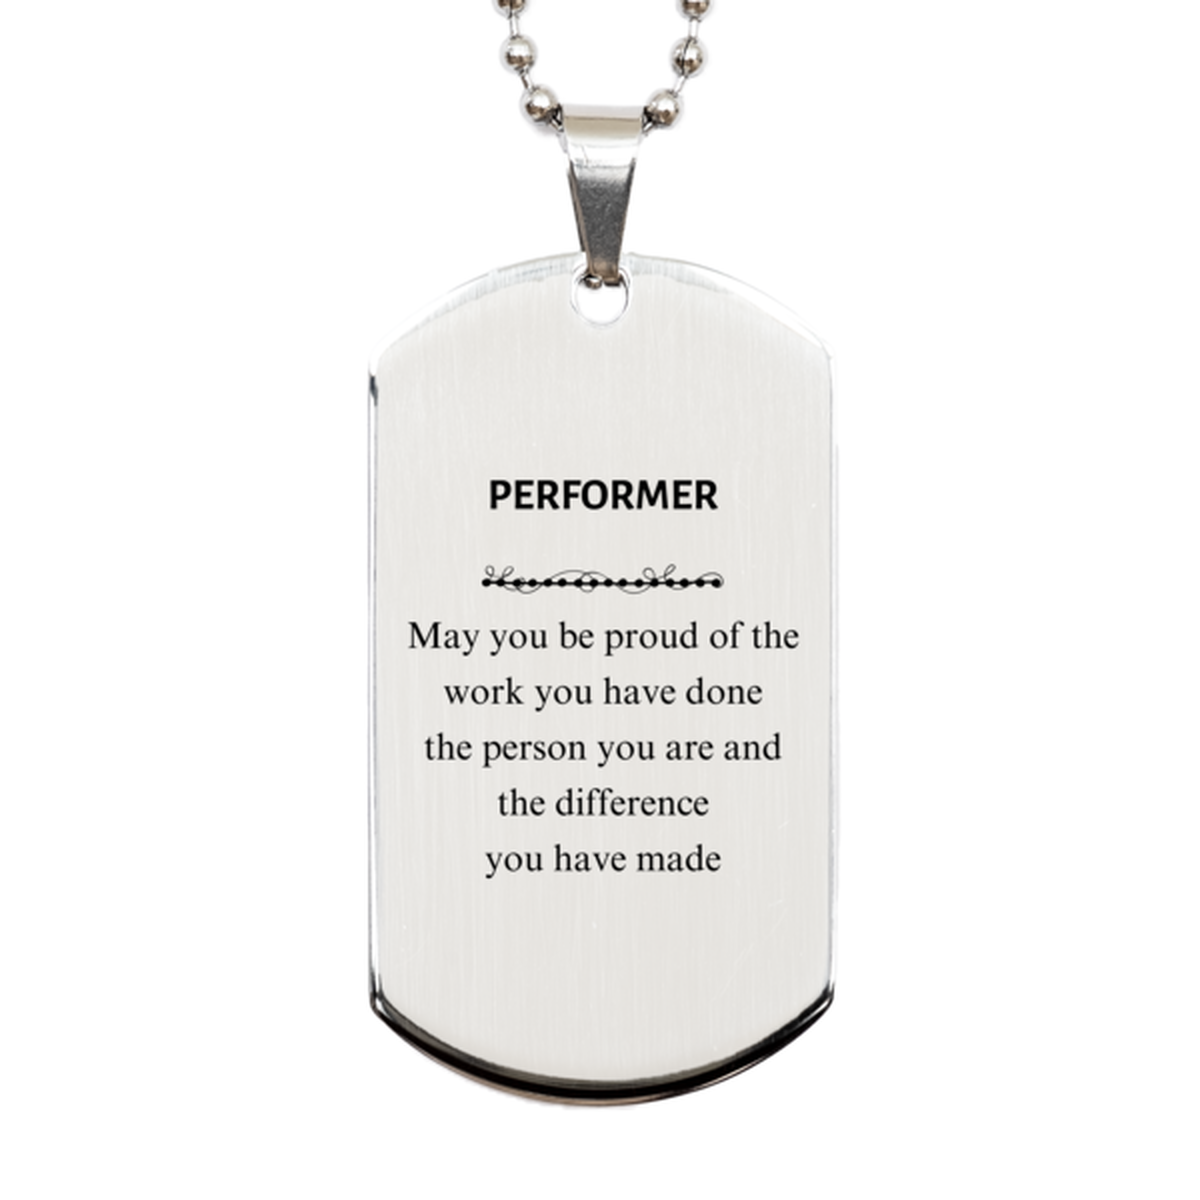 Performer May you be proud of the work you have done, Retirement Performer Silver Dog Tag for Colleague Appreciation Gifts Amazing for Performer